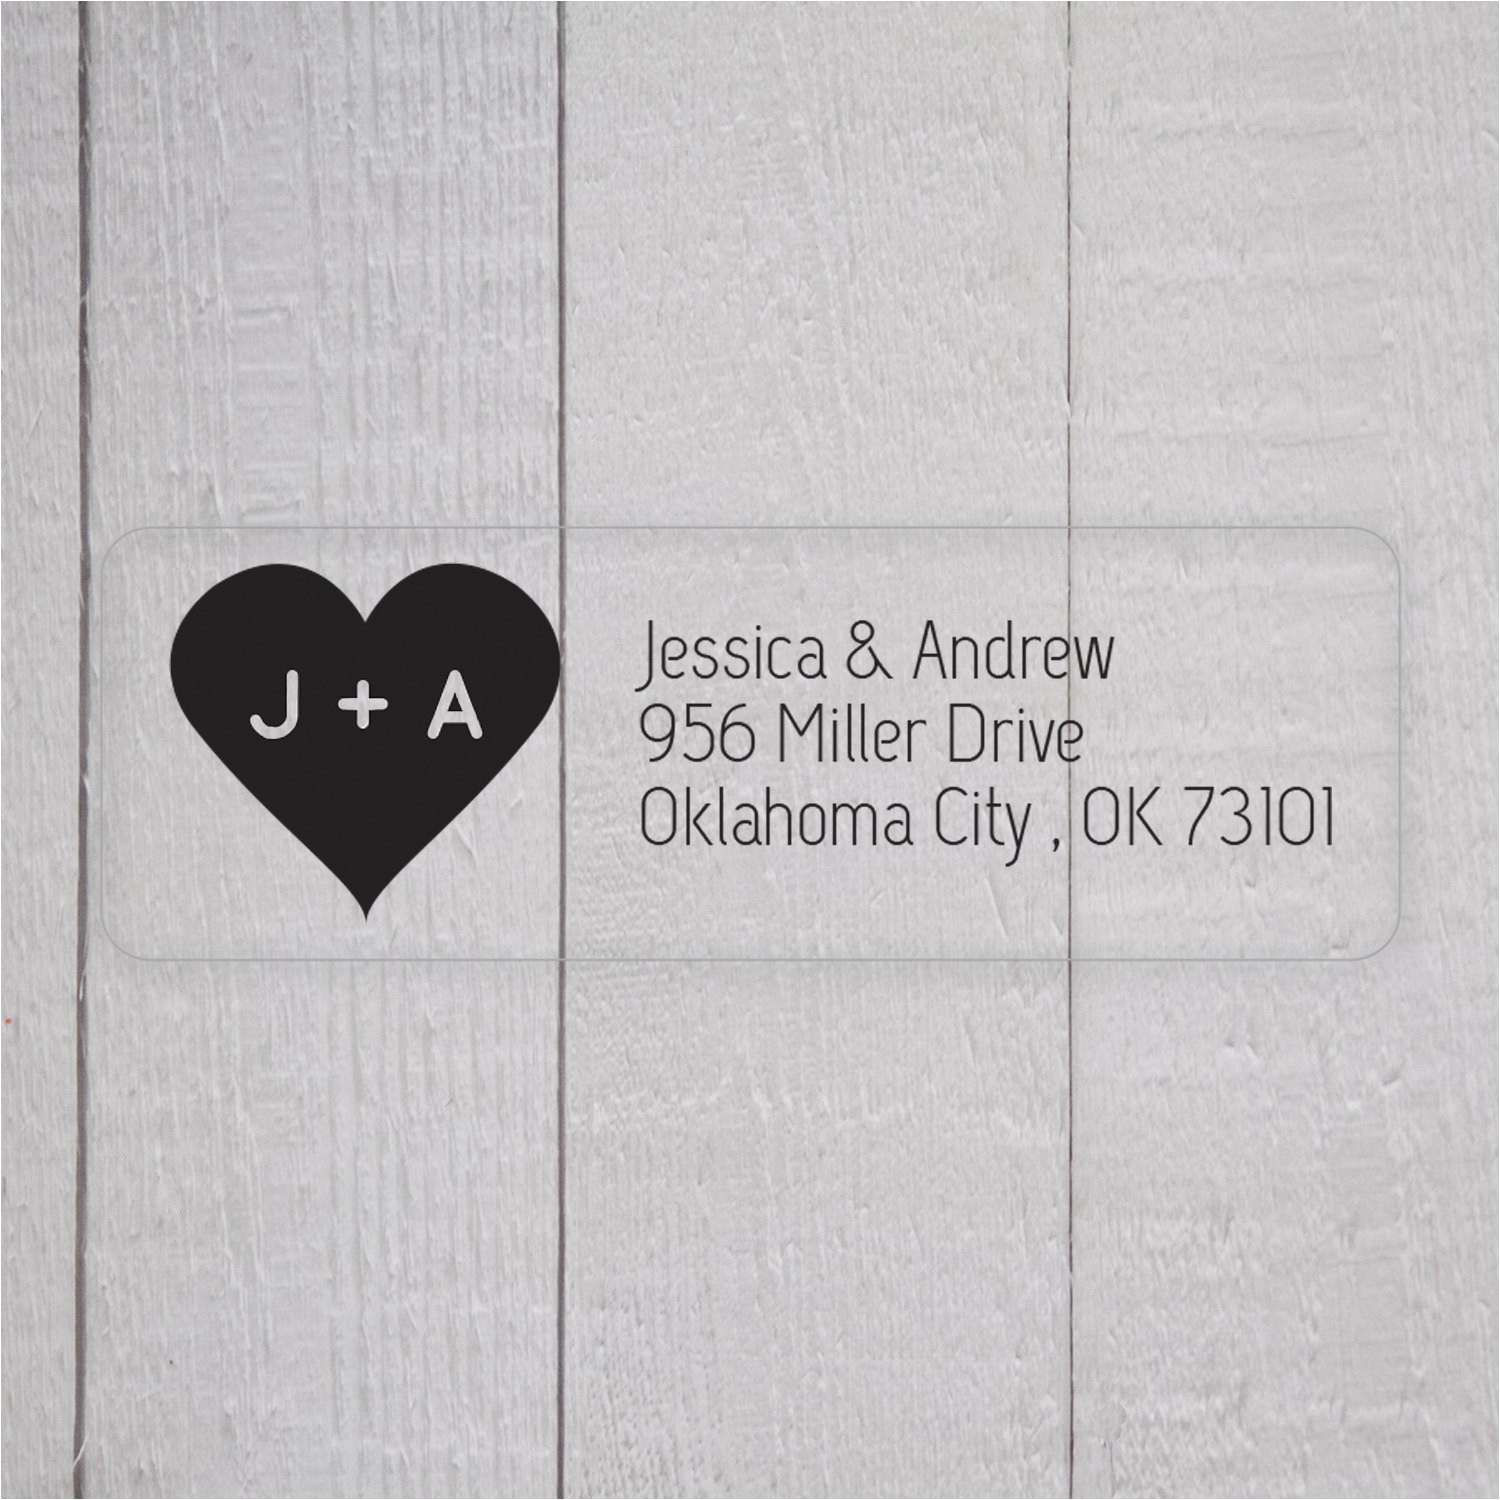 Clear Return Address Labels for Wedding Invitations Wedding Invitation Return Address Labels Clear by